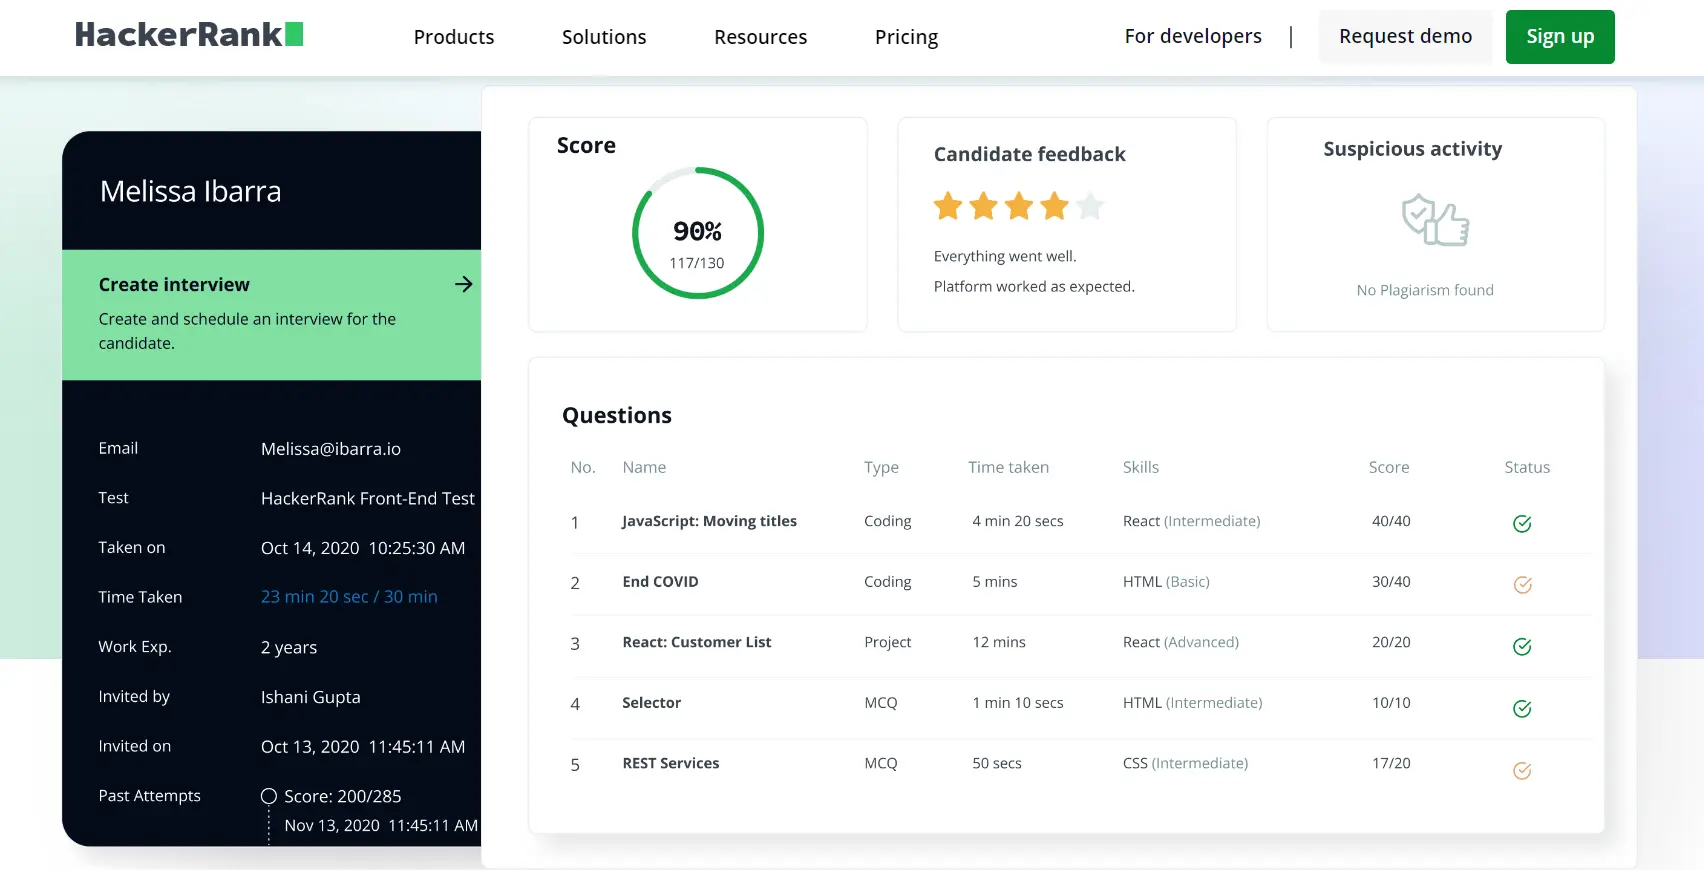 A screenshot of HackerRank’s website showing a sample candidate profile.